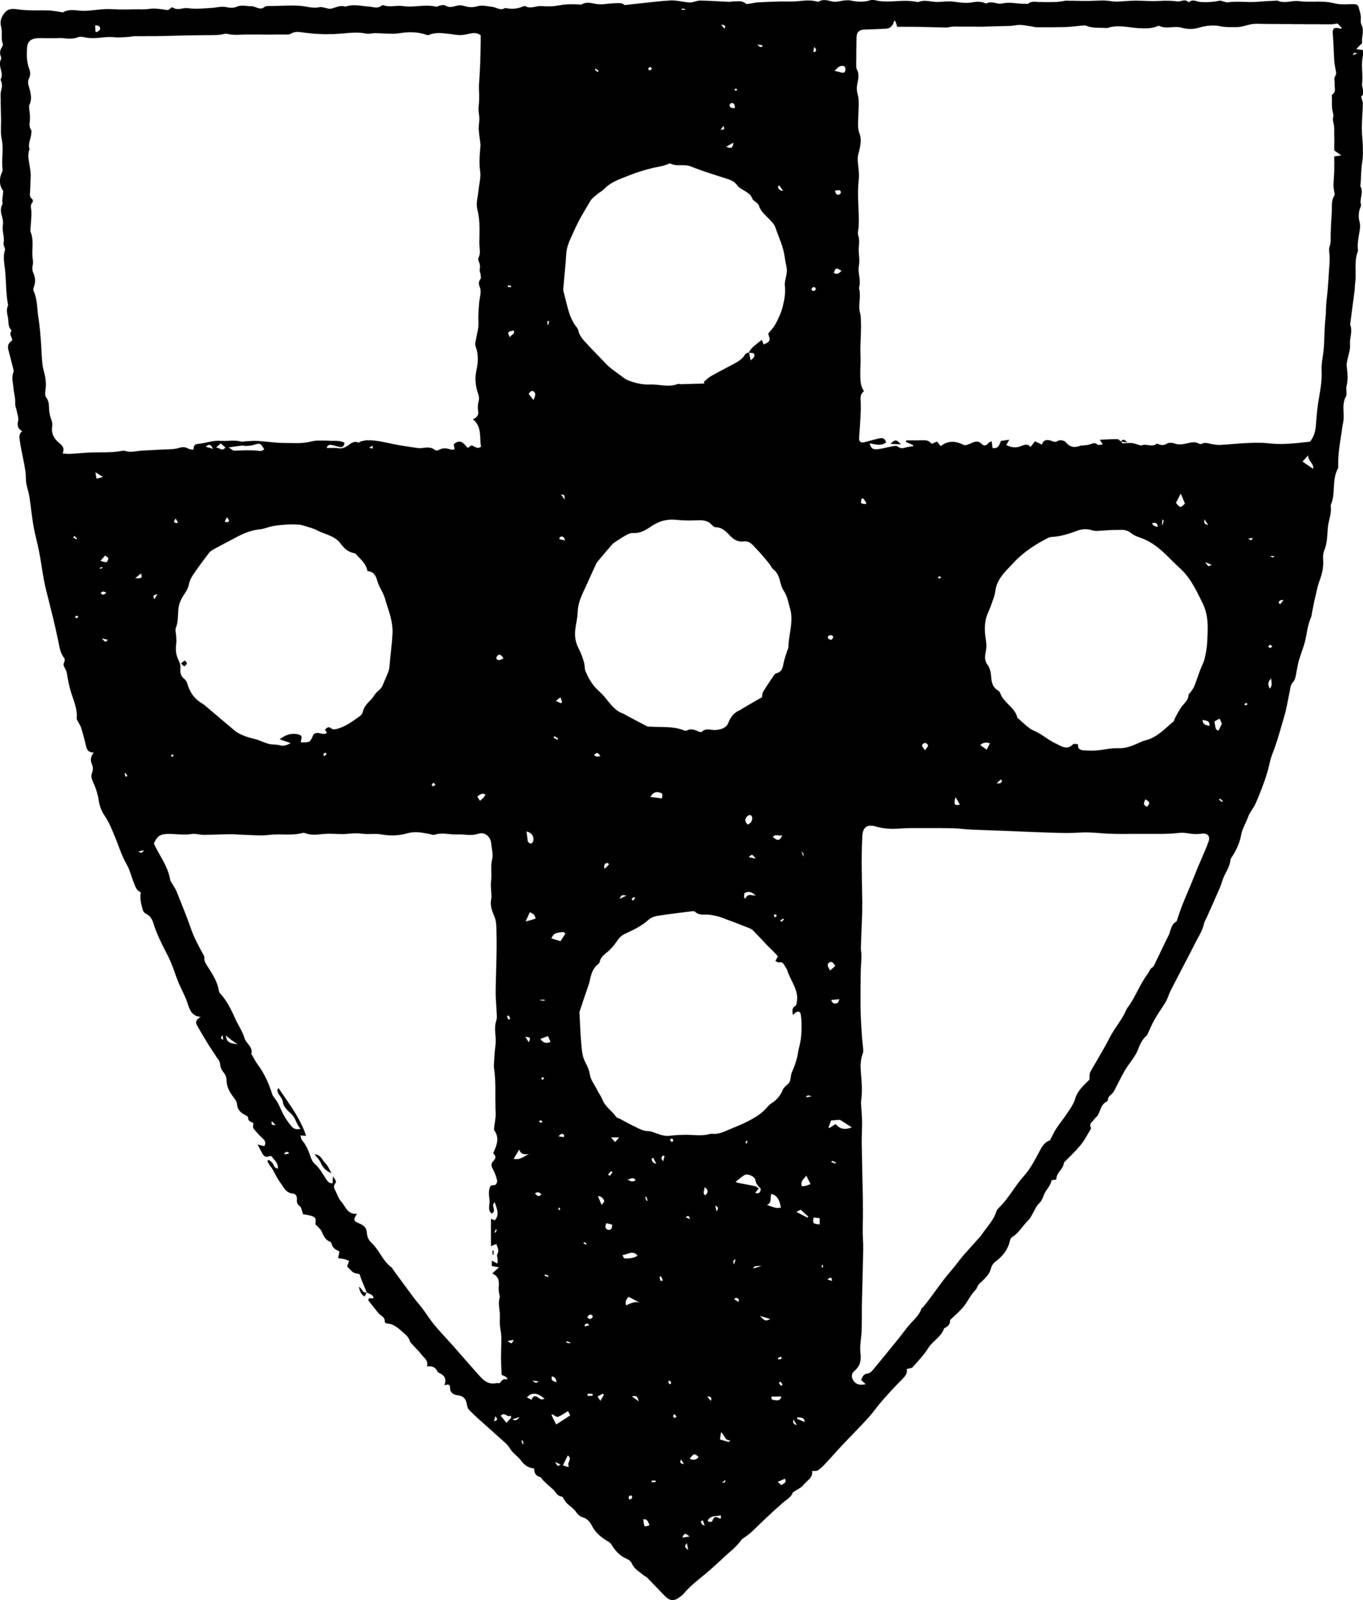 Shield with Roundels is an example of a heraldic shield with rou by Morphart